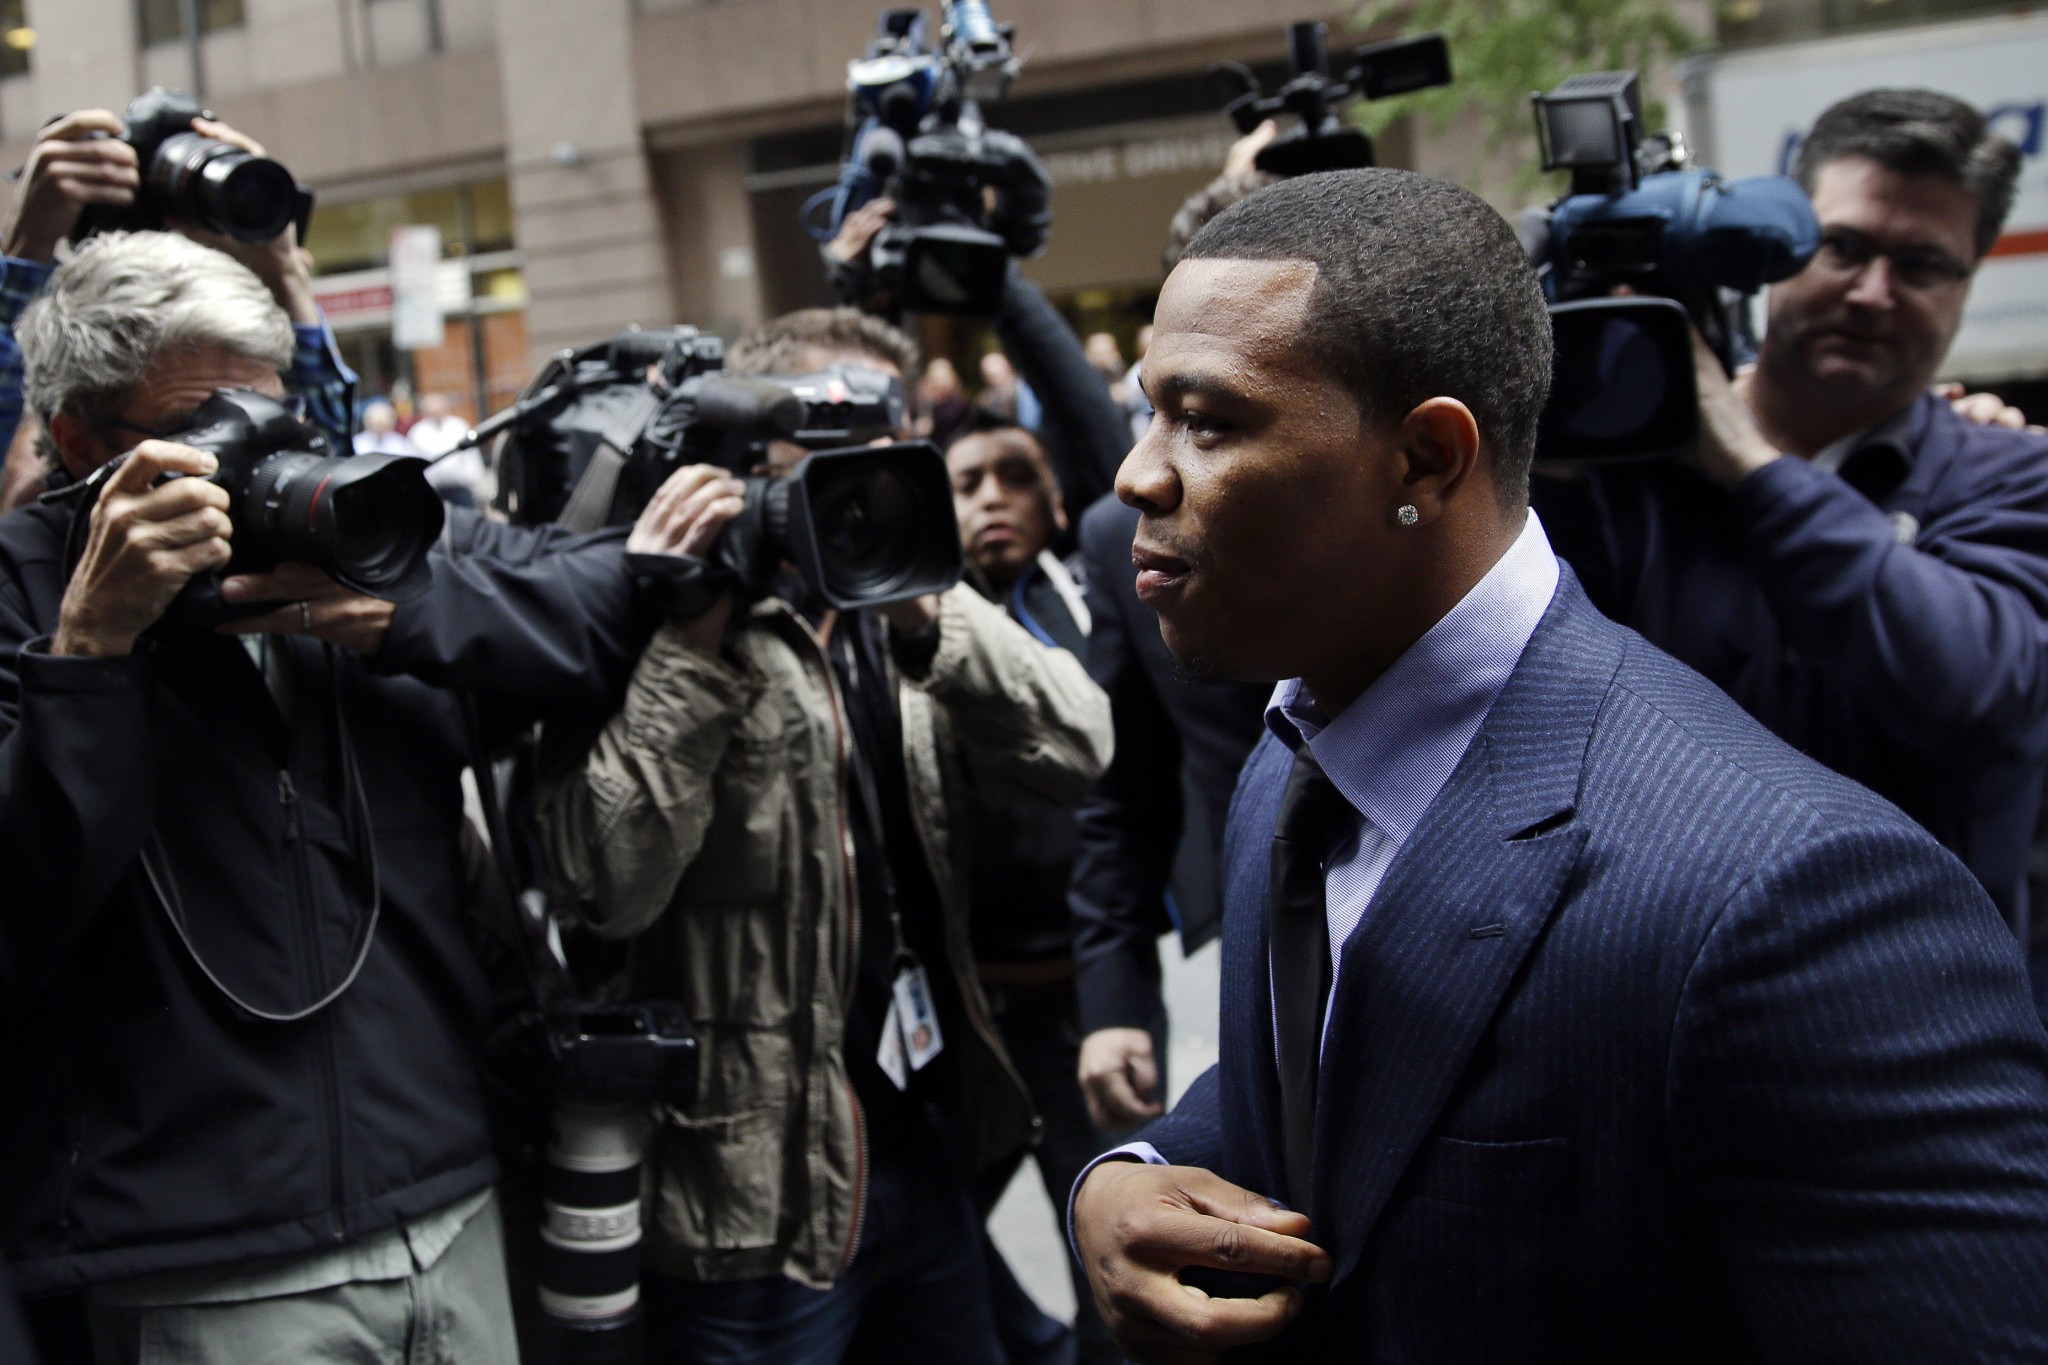 Ray Rice arrives for an appeal hearing of his indefinite suspension from the NFL, Wednesday, Nov. 5, 2014, in New York. (AP Photo/Seth Wenig)